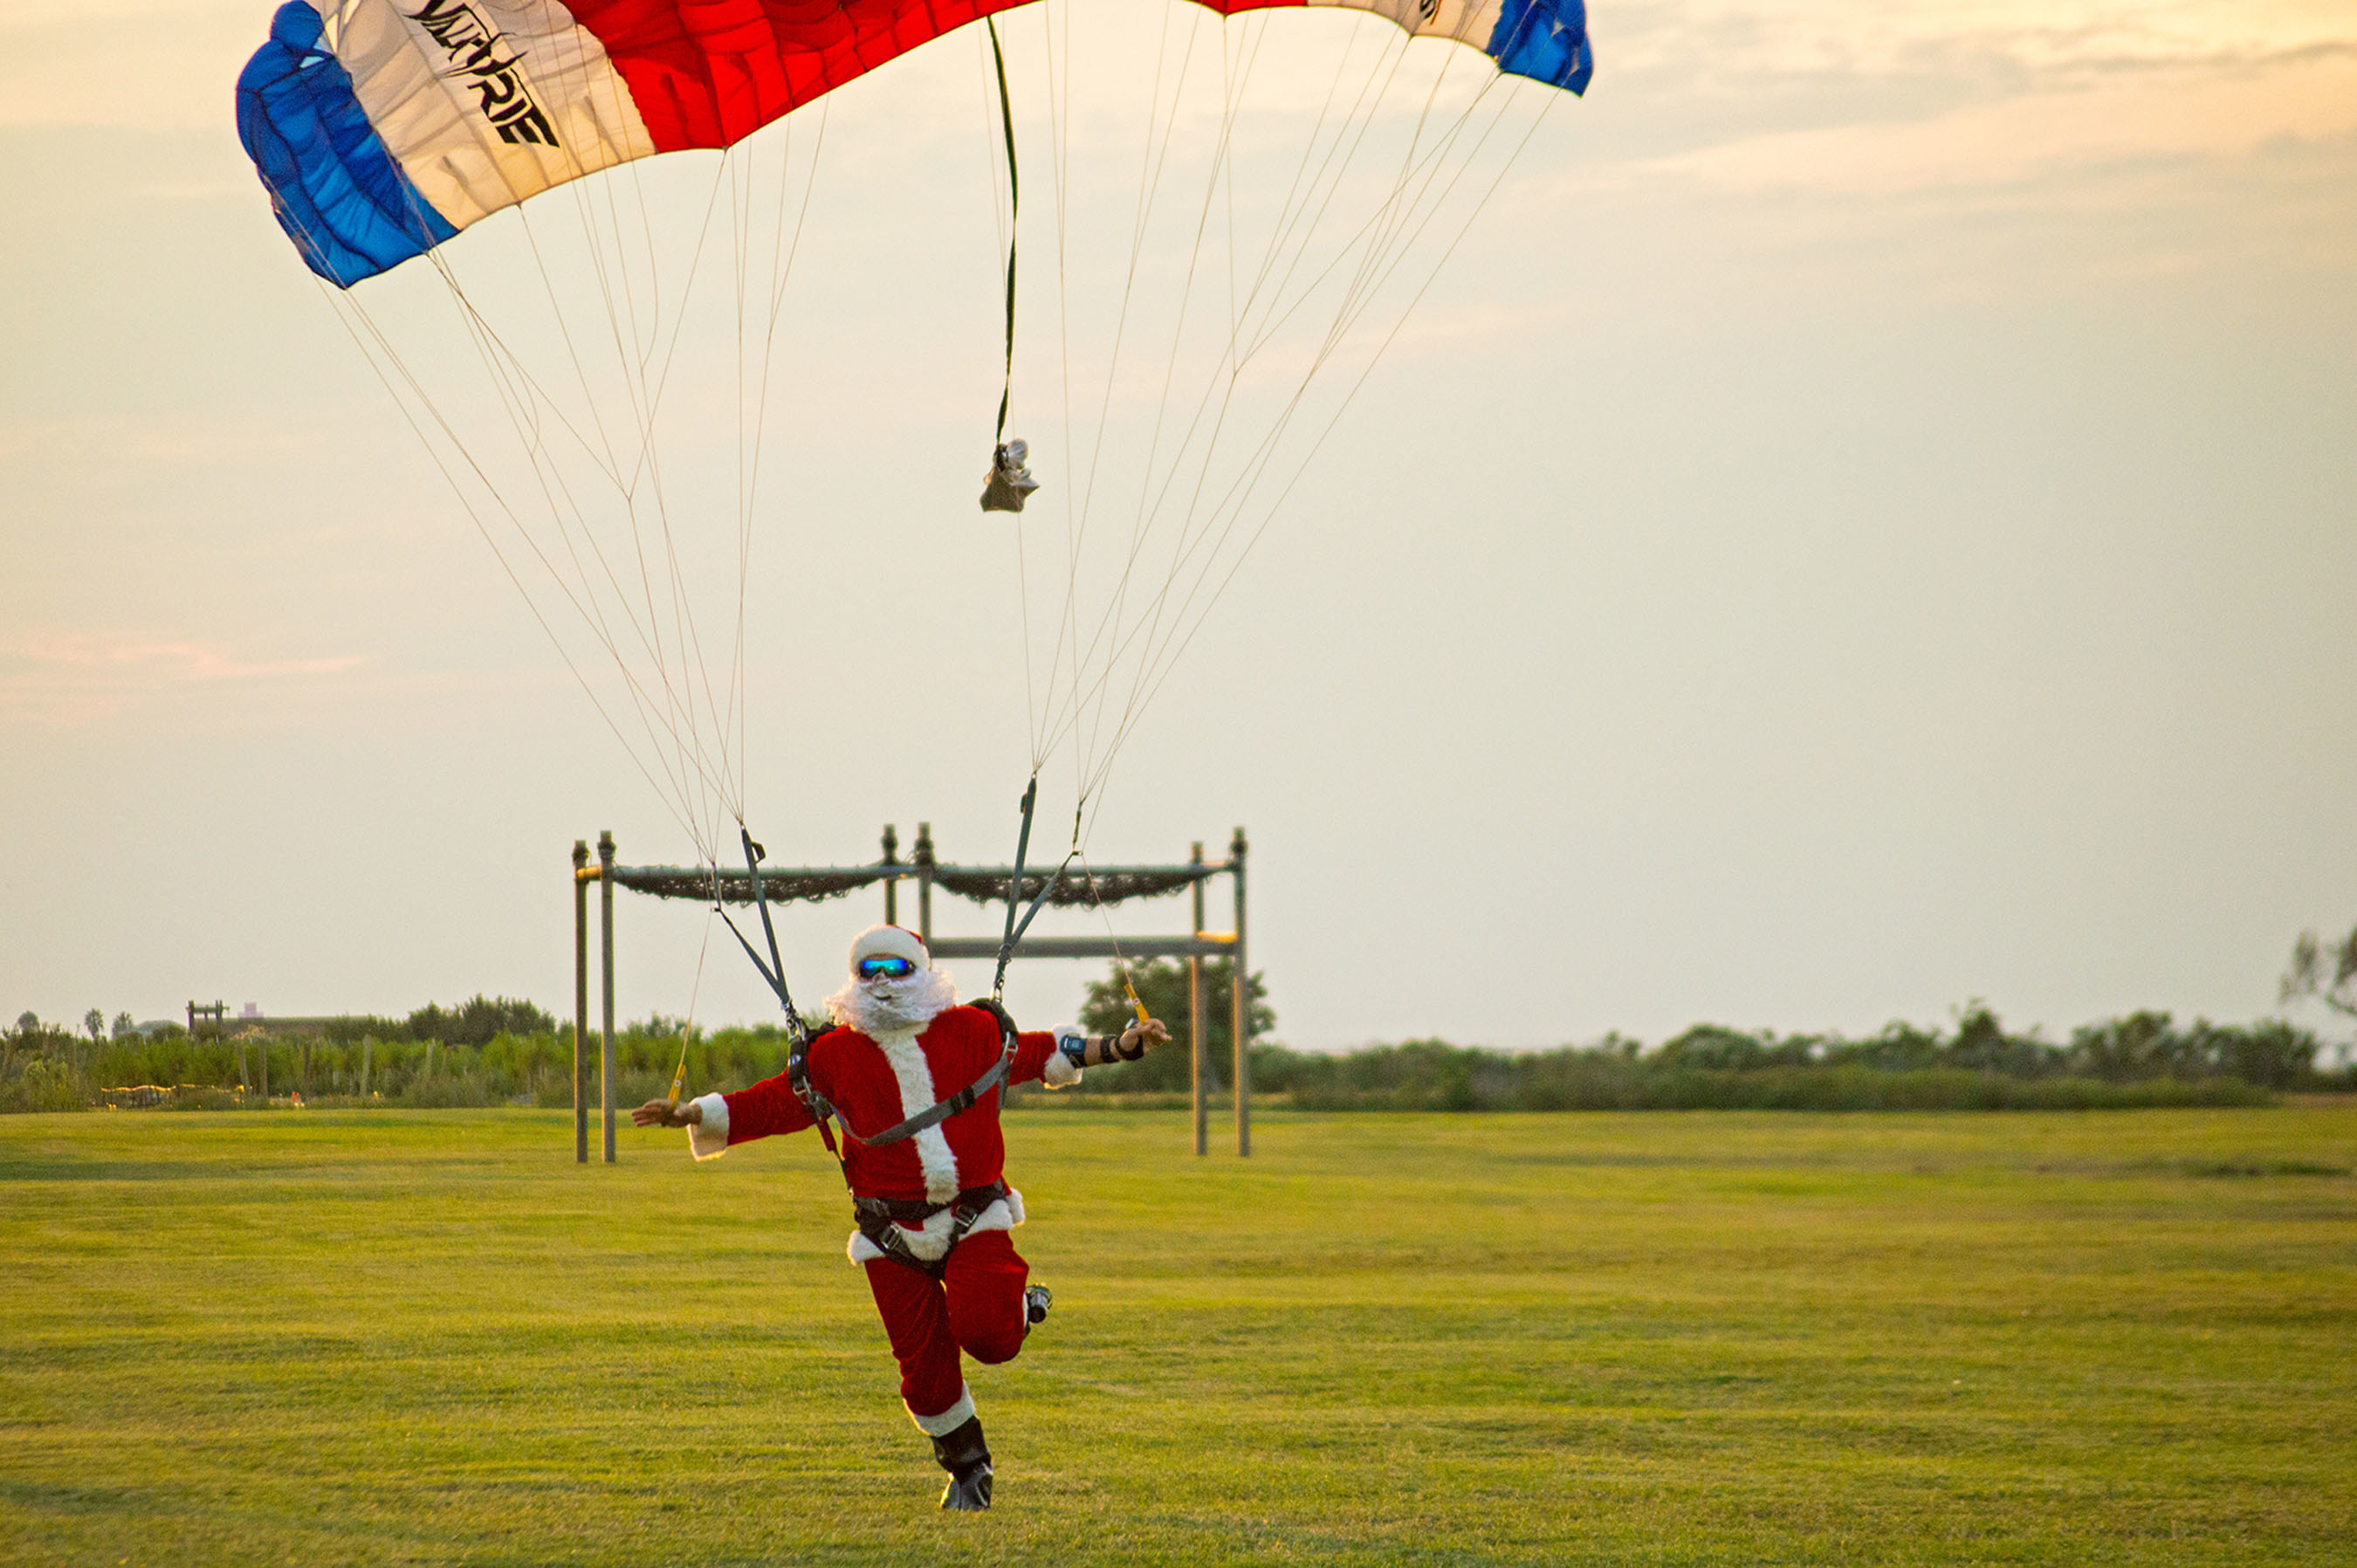 Santa parachuted in to a large crowd at Moody Gardens for the Opening Ceremony of Festival of Lights in Galveston, TX.